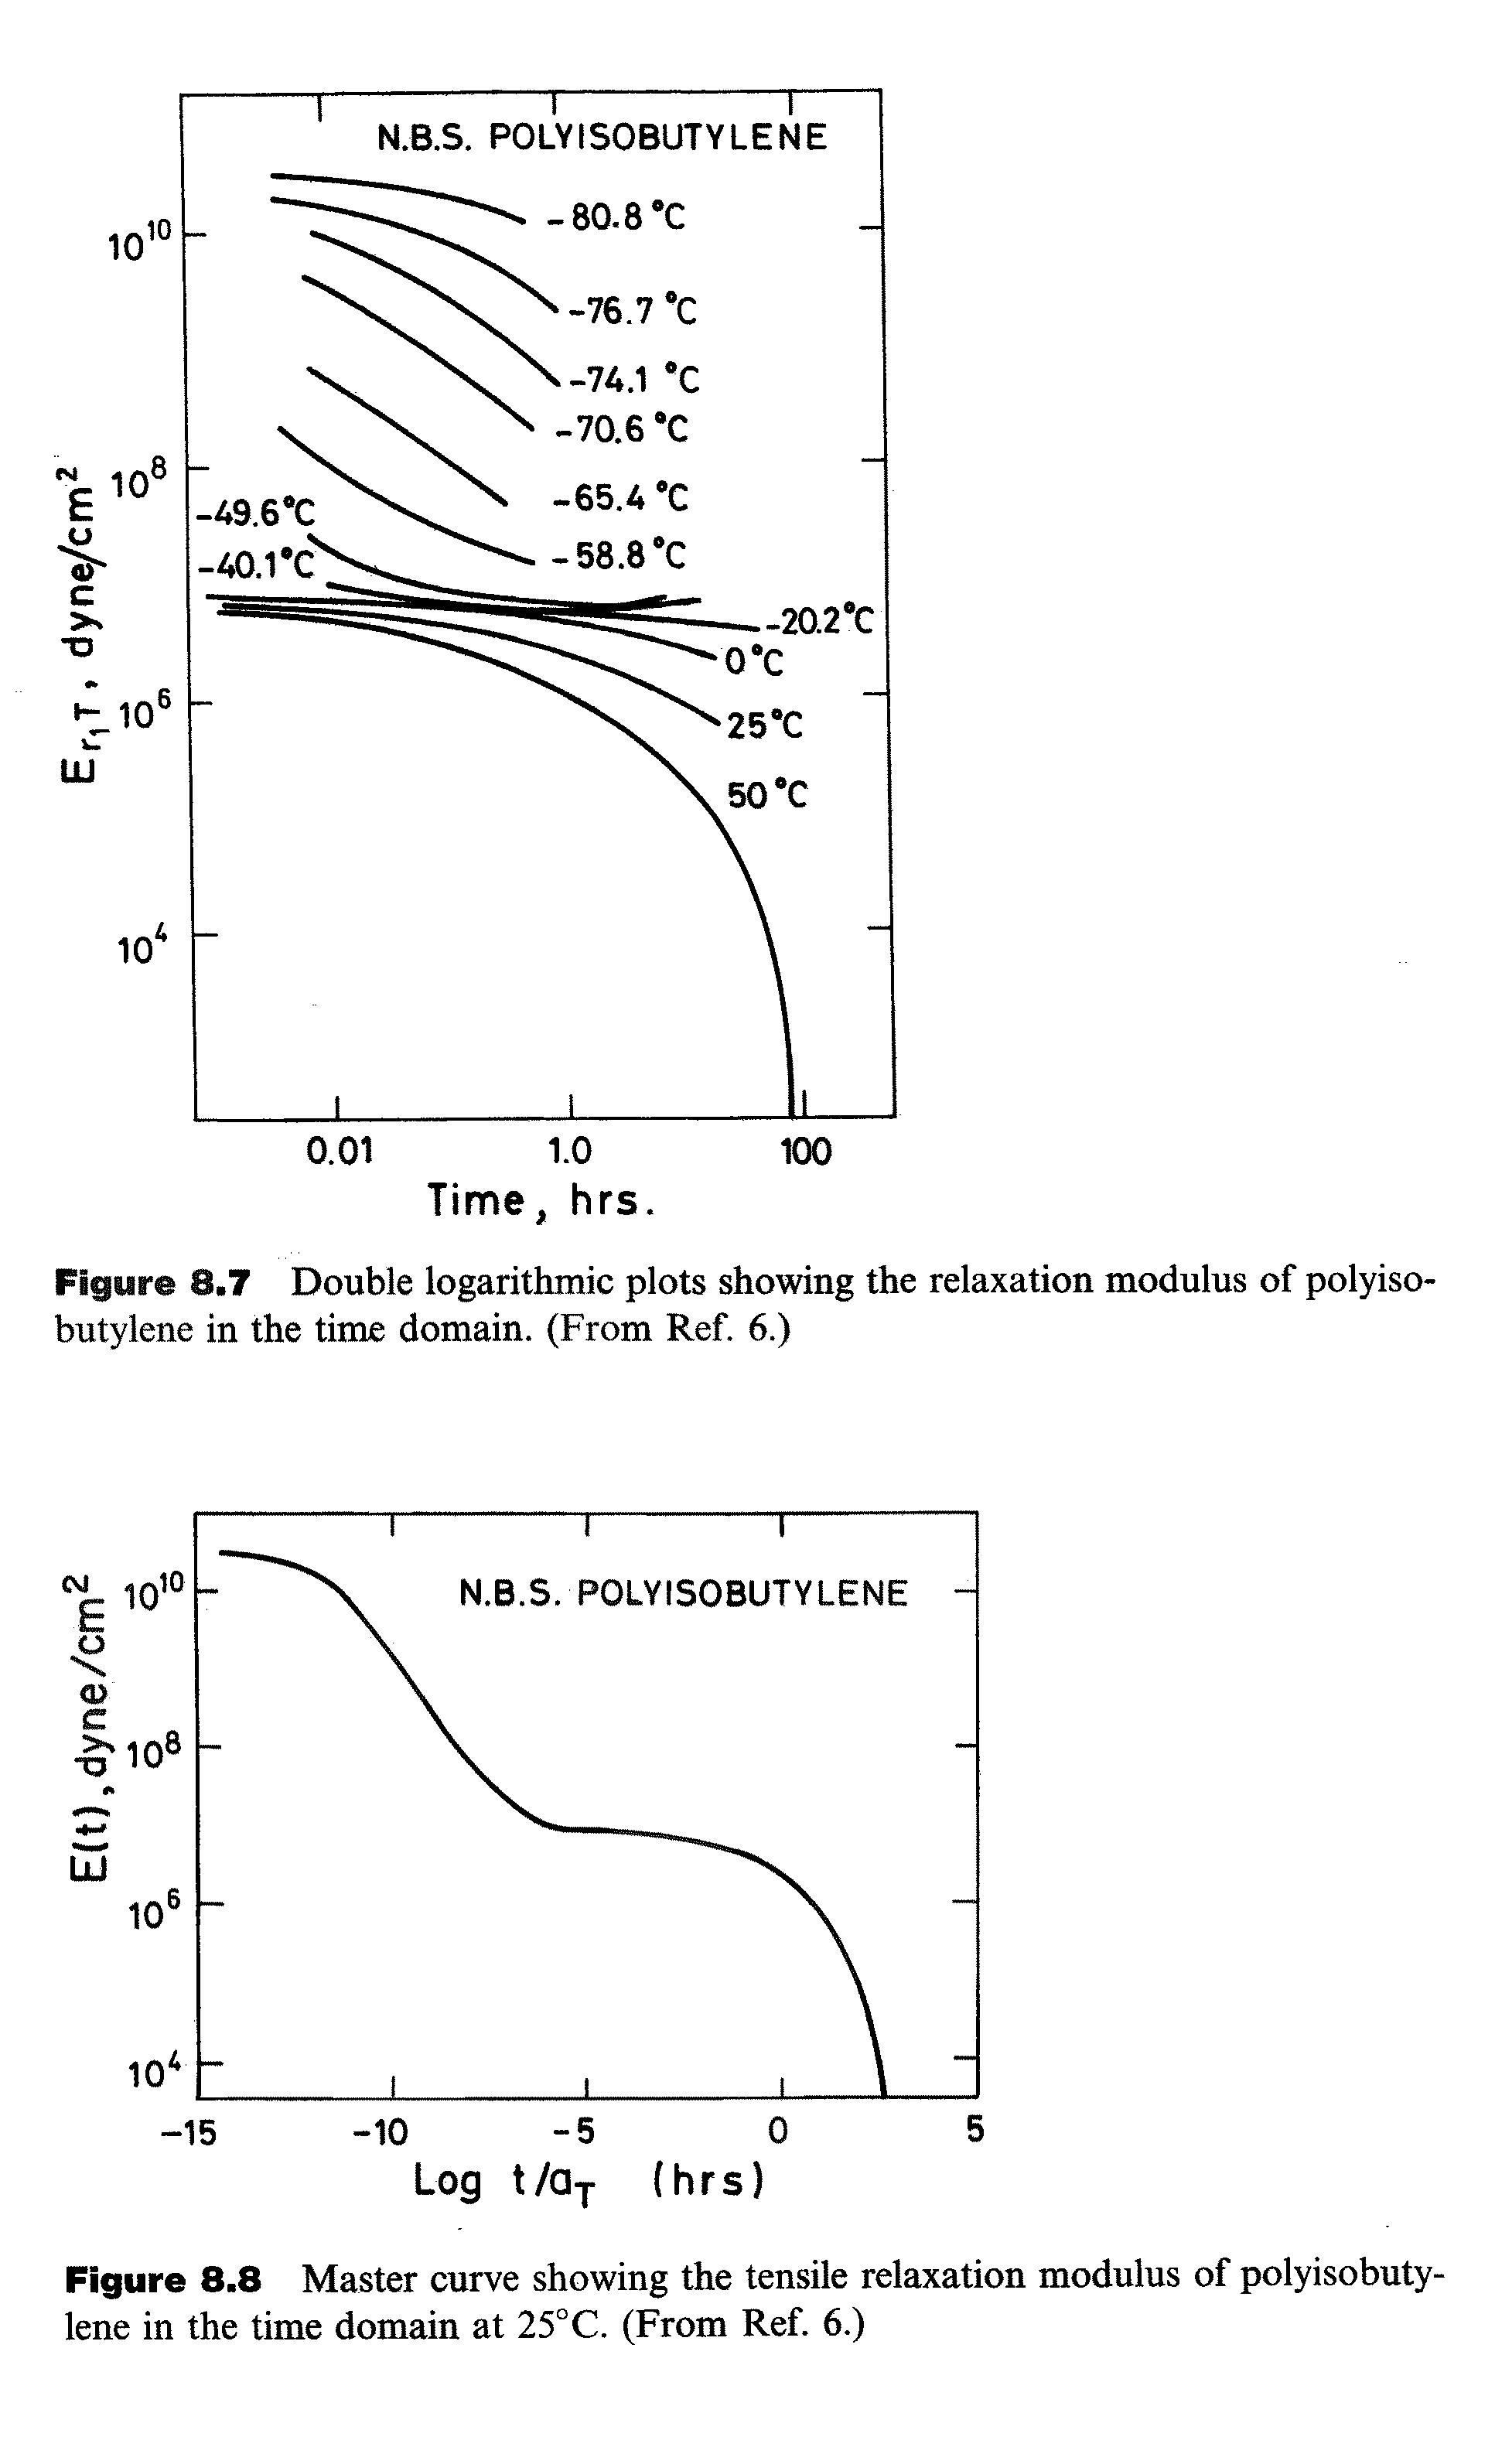 Figure 8.8 Master curve showing the tensile relaxation modulus of polyisobutylene in the time domain at 25°C. (From Ref. 6.)...